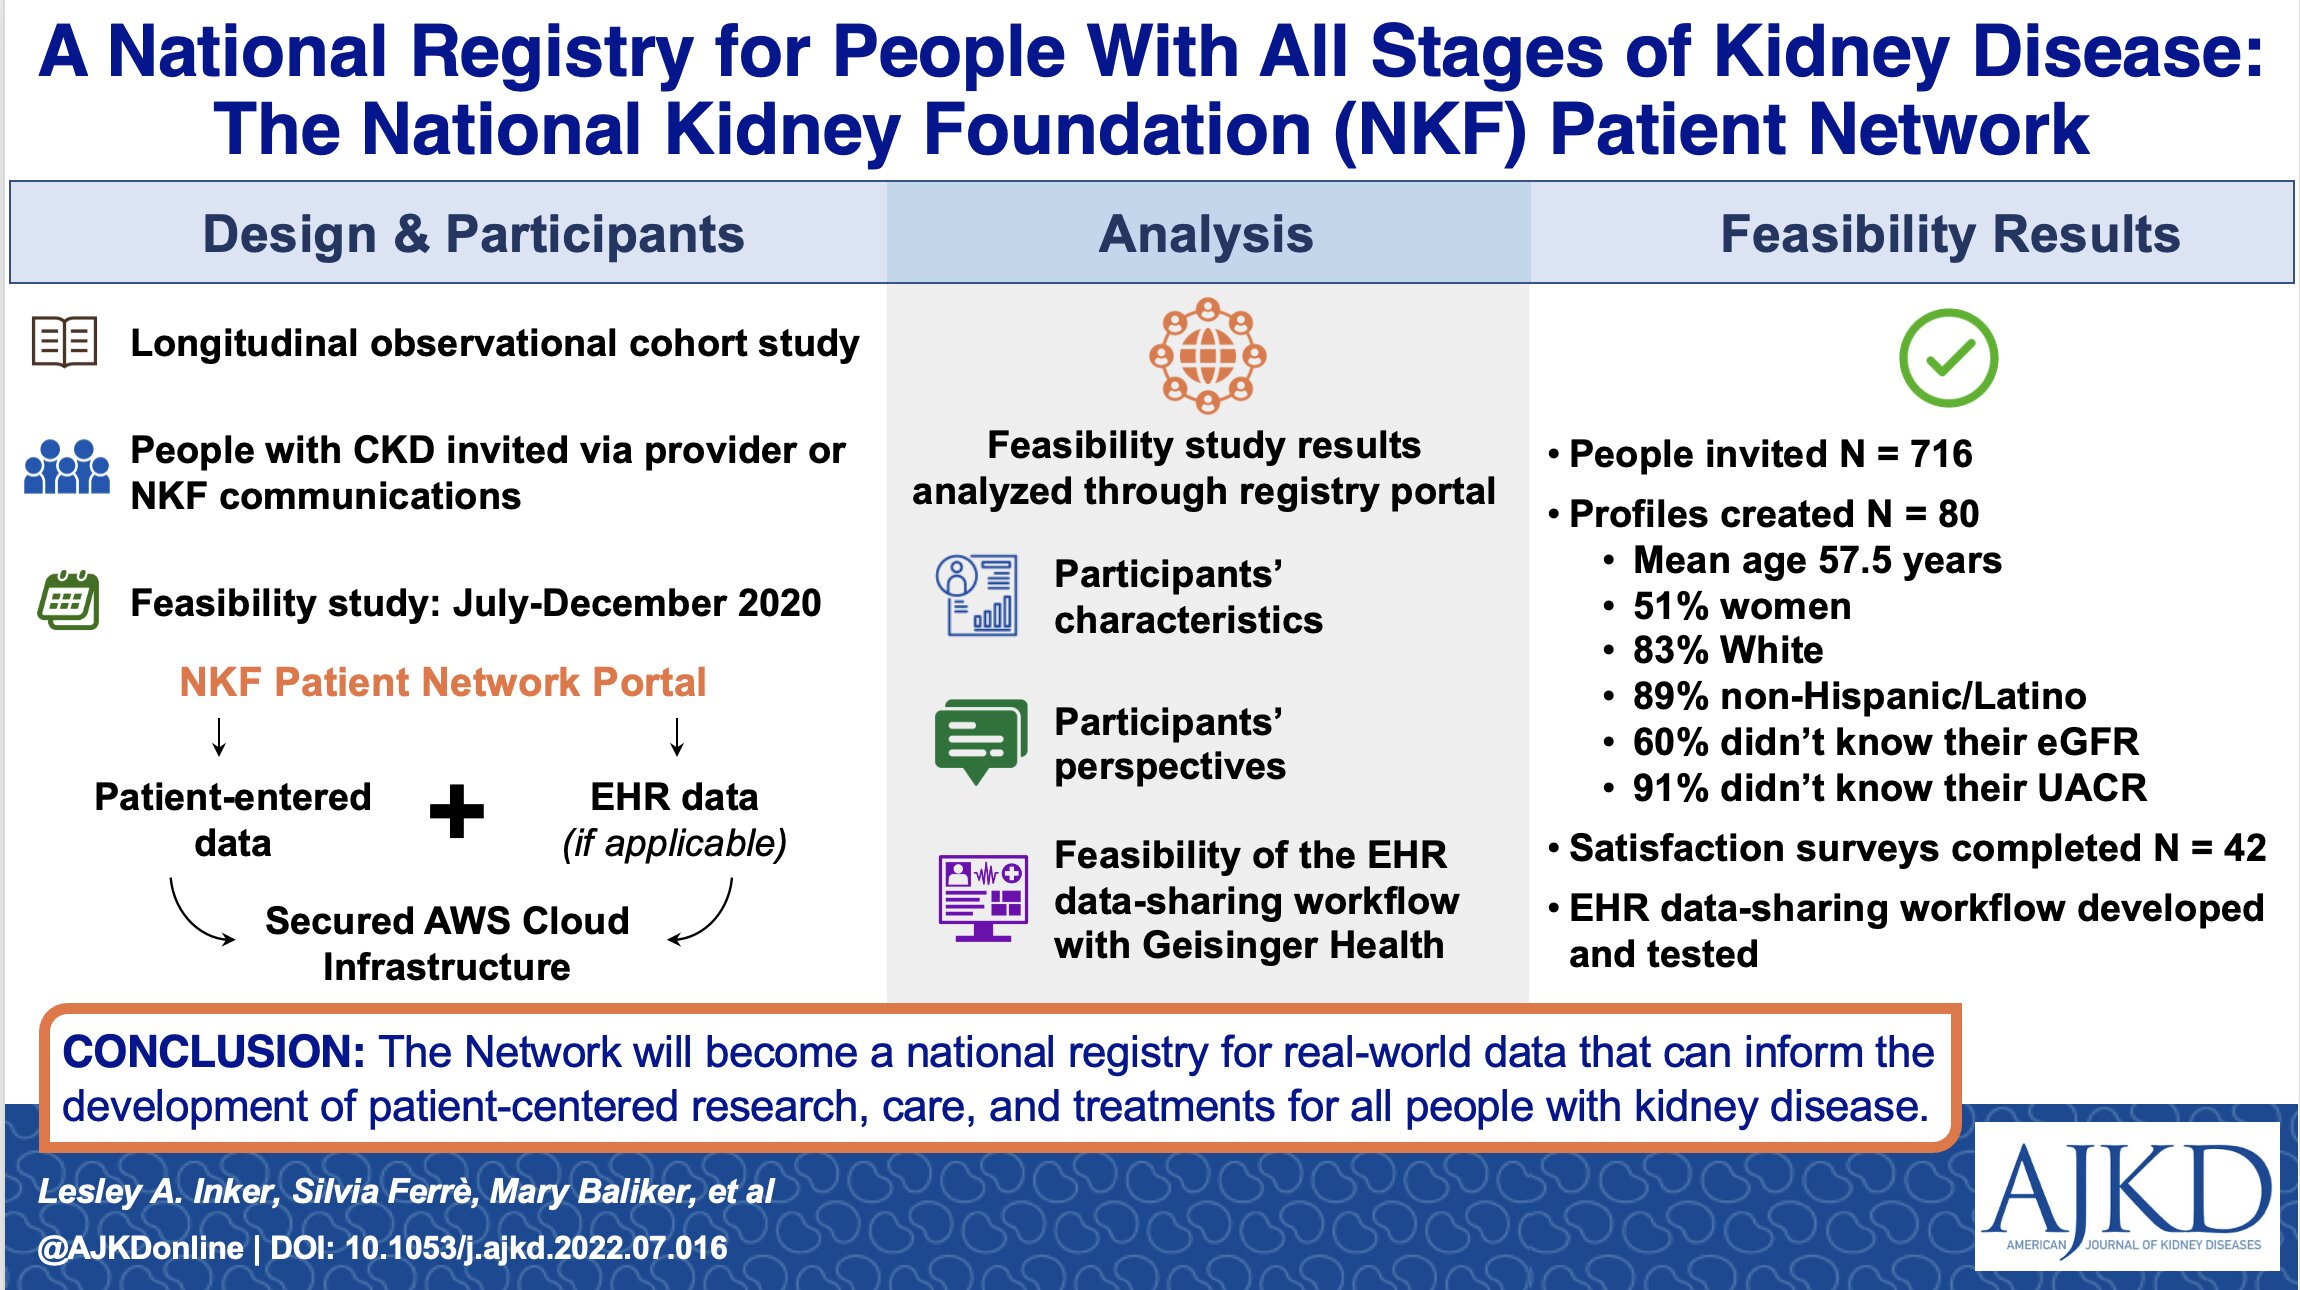 Low awareness of kidney disease remains a challenge for clinical trial recruitment